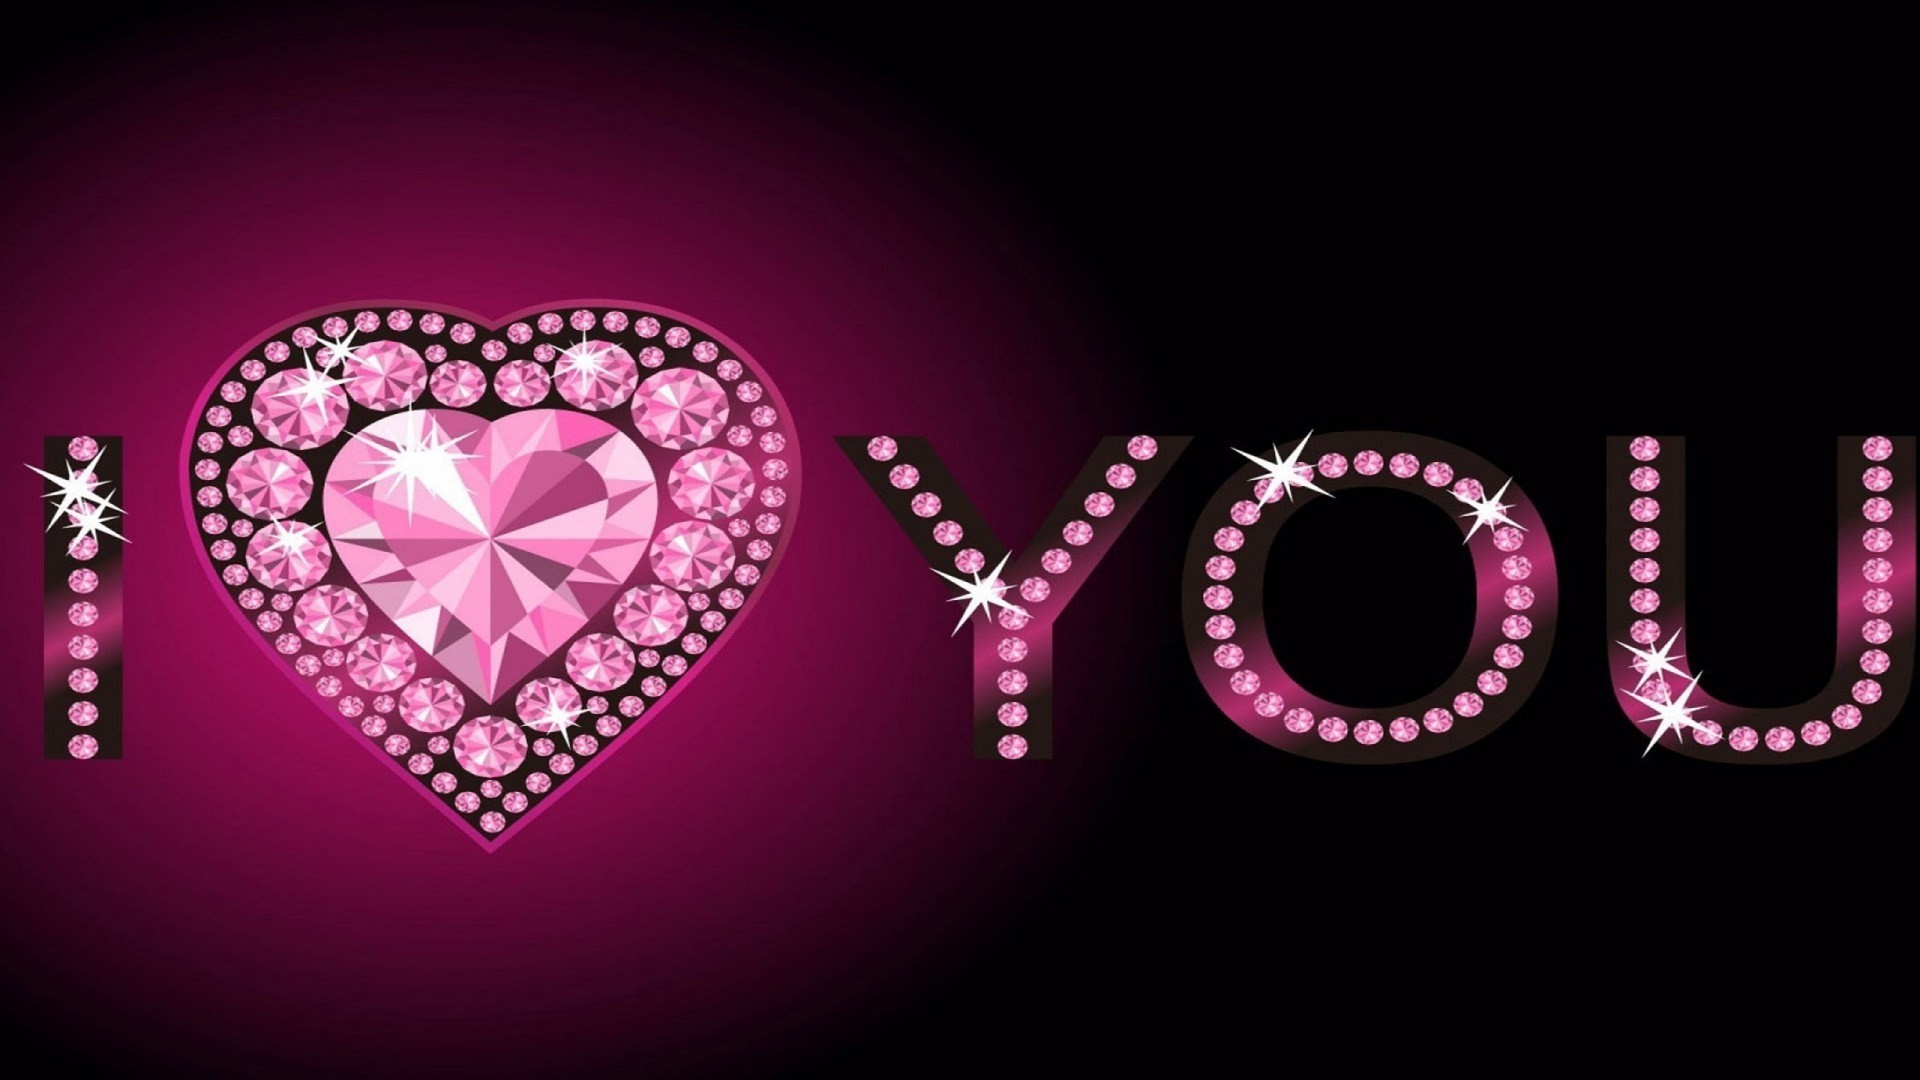 1920x1080 I Love You Full Wallpaper Hd3 07 Wallpapers13 from valentine heart wallpaper.  How about graphic ...